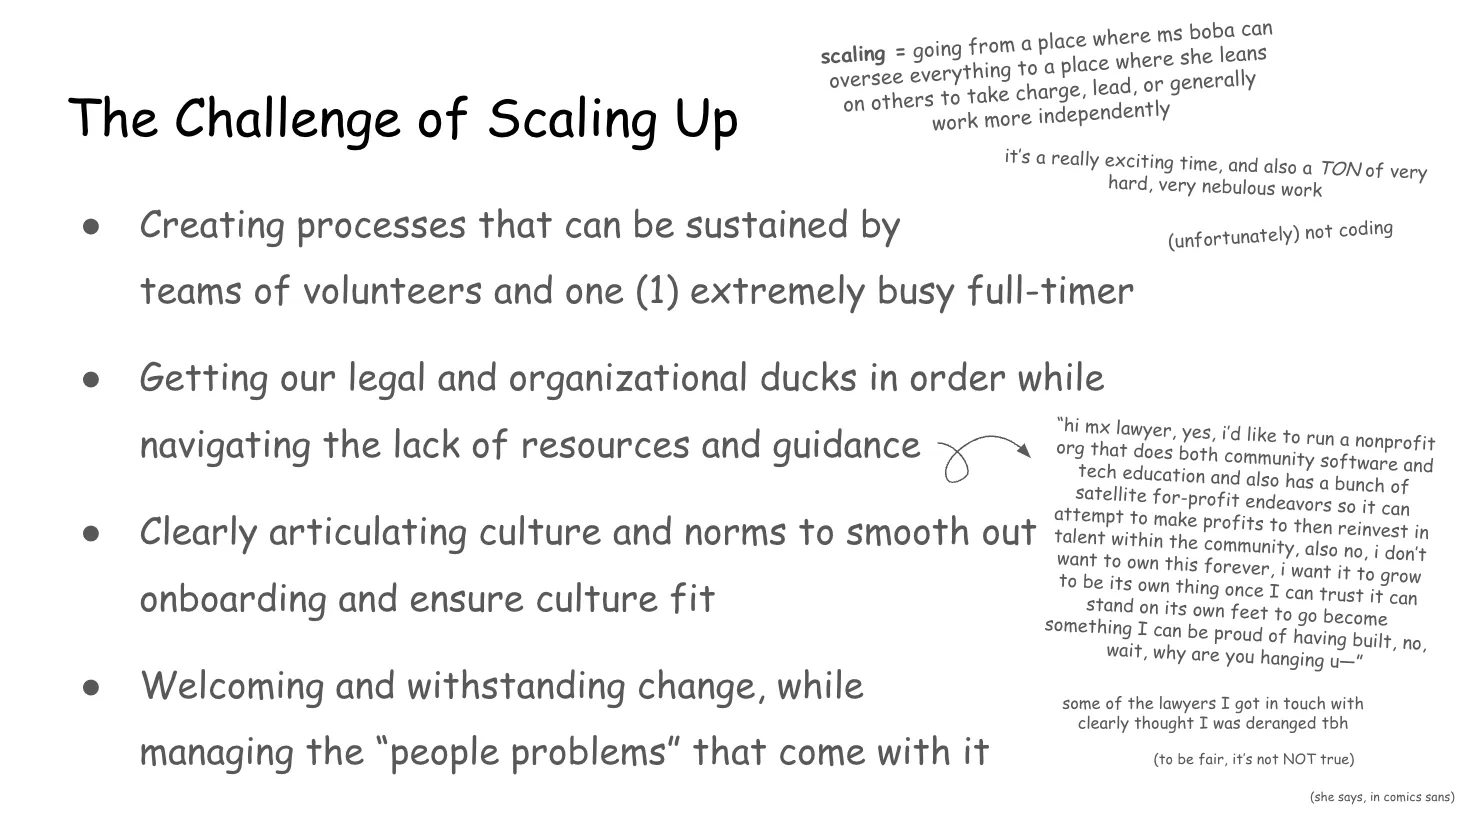 Slide 16:

The Challenge of Scaling Up

scaling = going from a place where ms boba can oversee everything to a place
where she leans on others to take charge, lead, or generally  work more
independently

it’s a really exciting time, and also a TON of very hard, very nebulous work

(unfortunately) not coding

1. Creating processes that can be sustained by teams of volunteers and one
extremely busy full-timer

2. Getting our legal and organizational ducks in order while navigating the lack
of resources and guidance

“hi mx. lawyer, yes, I’d like to run a nonprofit org that does both community
software and tech education and also has a bunch of satellite for-profit
endeavors so it can attempt to make profits to then reinvest in talent within
the community, also no, I don’t want to own this forever, I want it to grow to
be its own thing once I can trust it can stand on its own feet to go become
something I can be proud of having built, no, wait, why are you hanging up-”

some of the lawyers I got in touch with clearly thought I was deranged tbh

(to be fair, it’s not NOT true)

(she says, in comics sans)

3. Clearly articulating culture and norms to smooth out onboarding and ensure
culture fit

4. Welcoming and withstanding change, while managing the “people problems” that
come with it